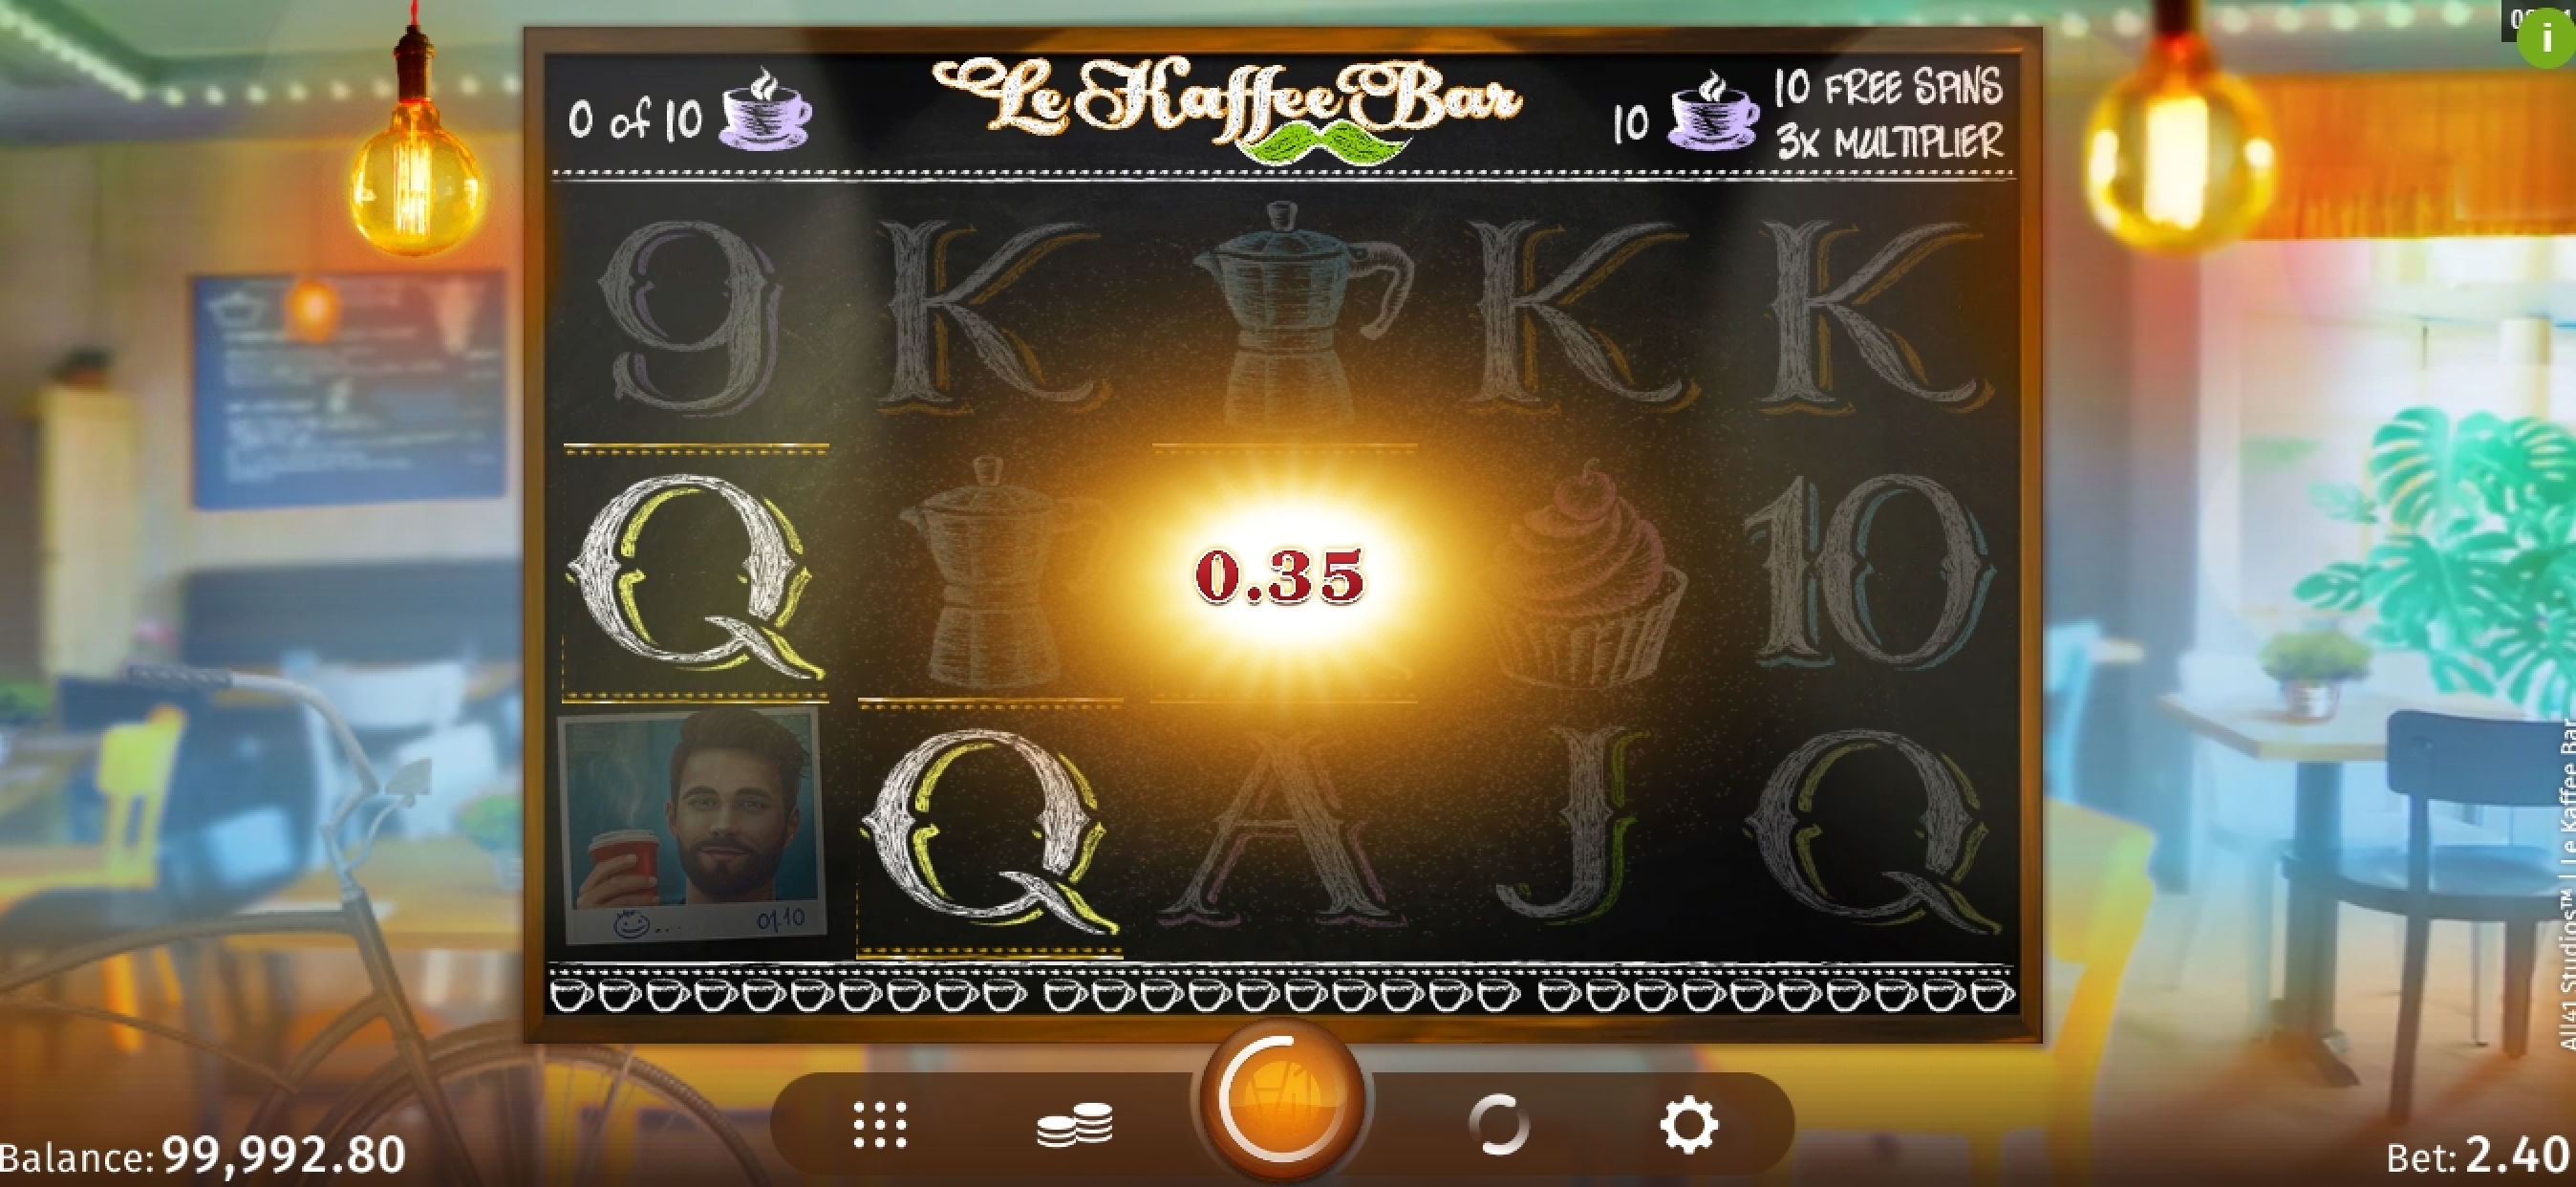 Win Money in Le Kaffee Bar Free Slot Game by All41 Studios